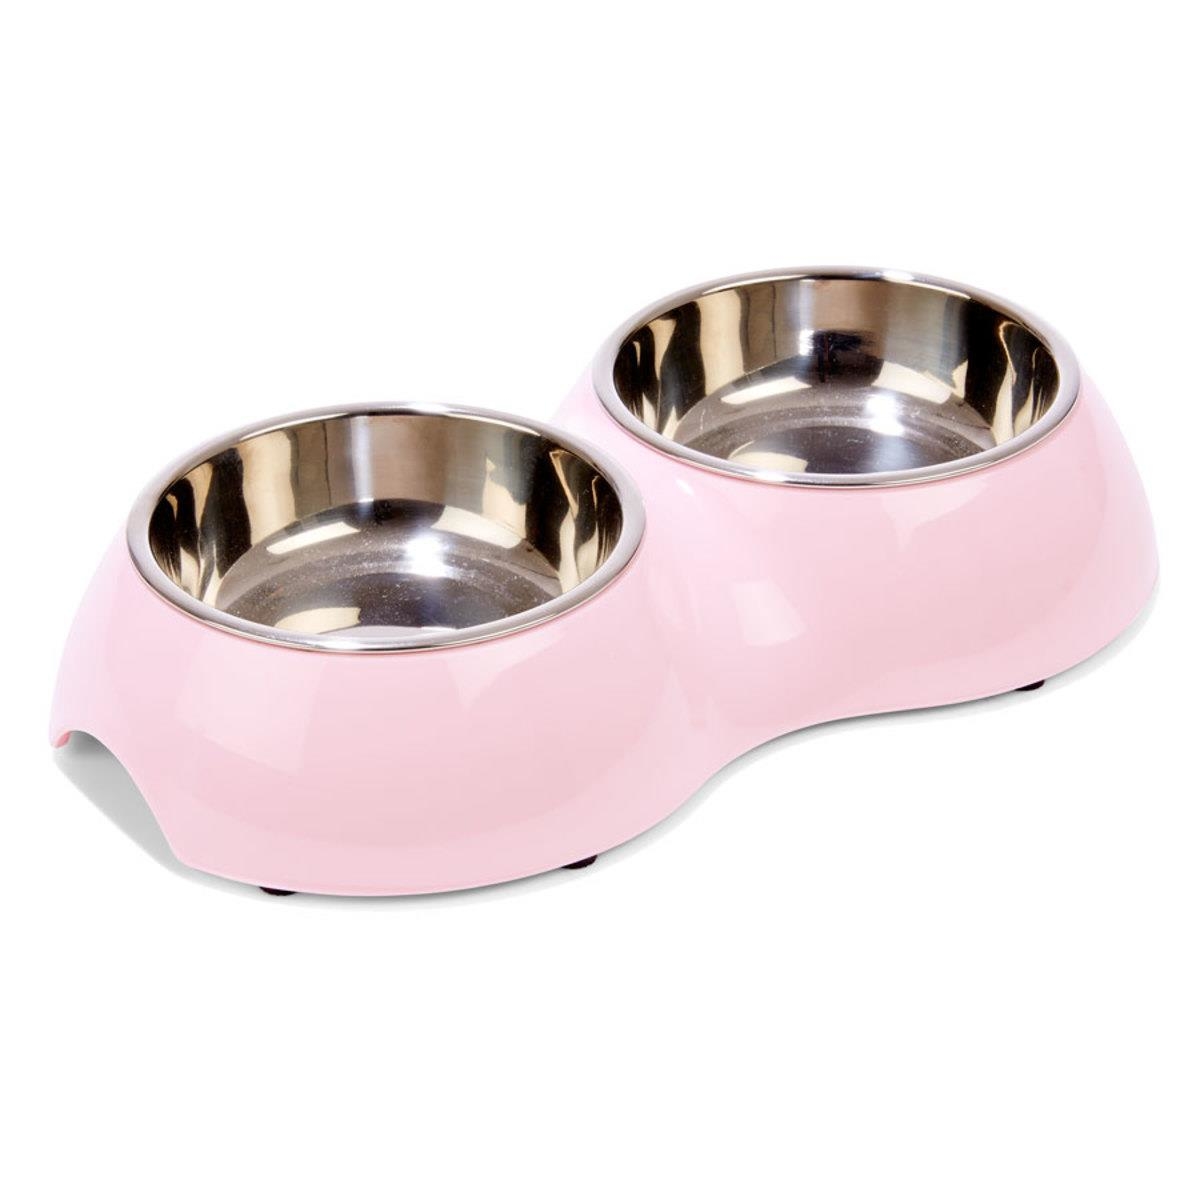 Twin Cat Bowl - Pink